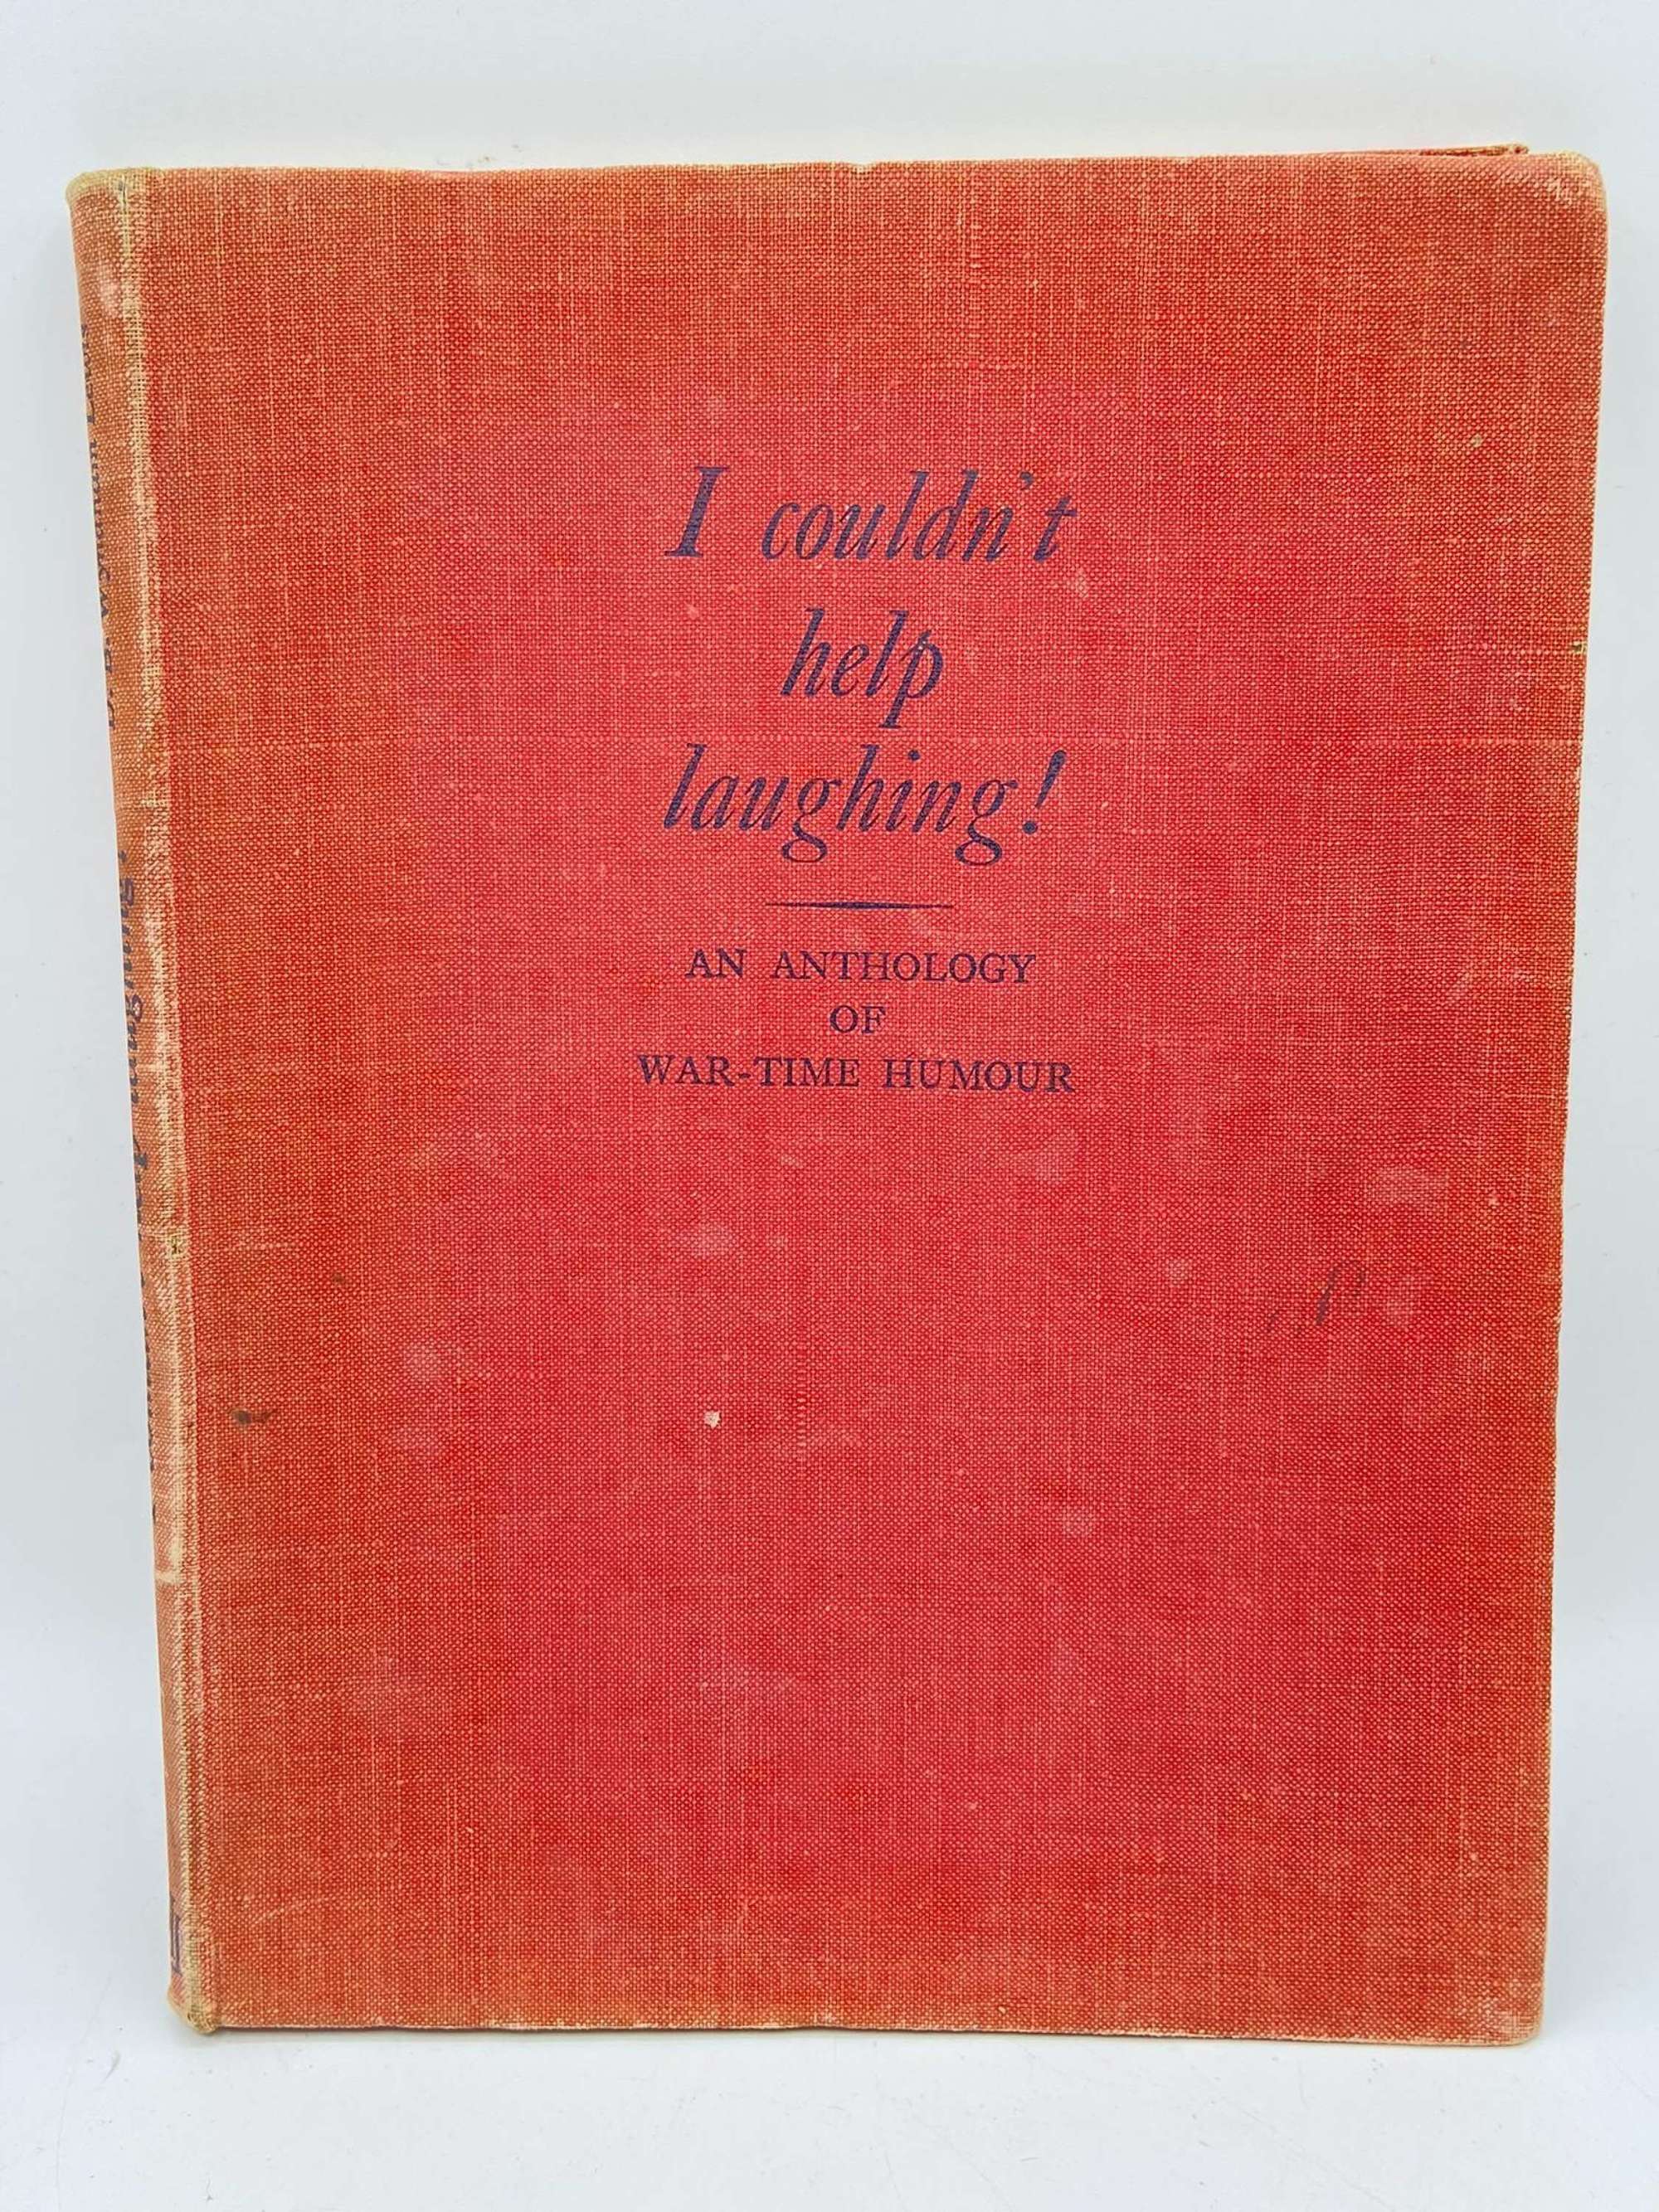 WW2 I Couldn't Help Laughing! - An Anthology of War-Time Humour 1942